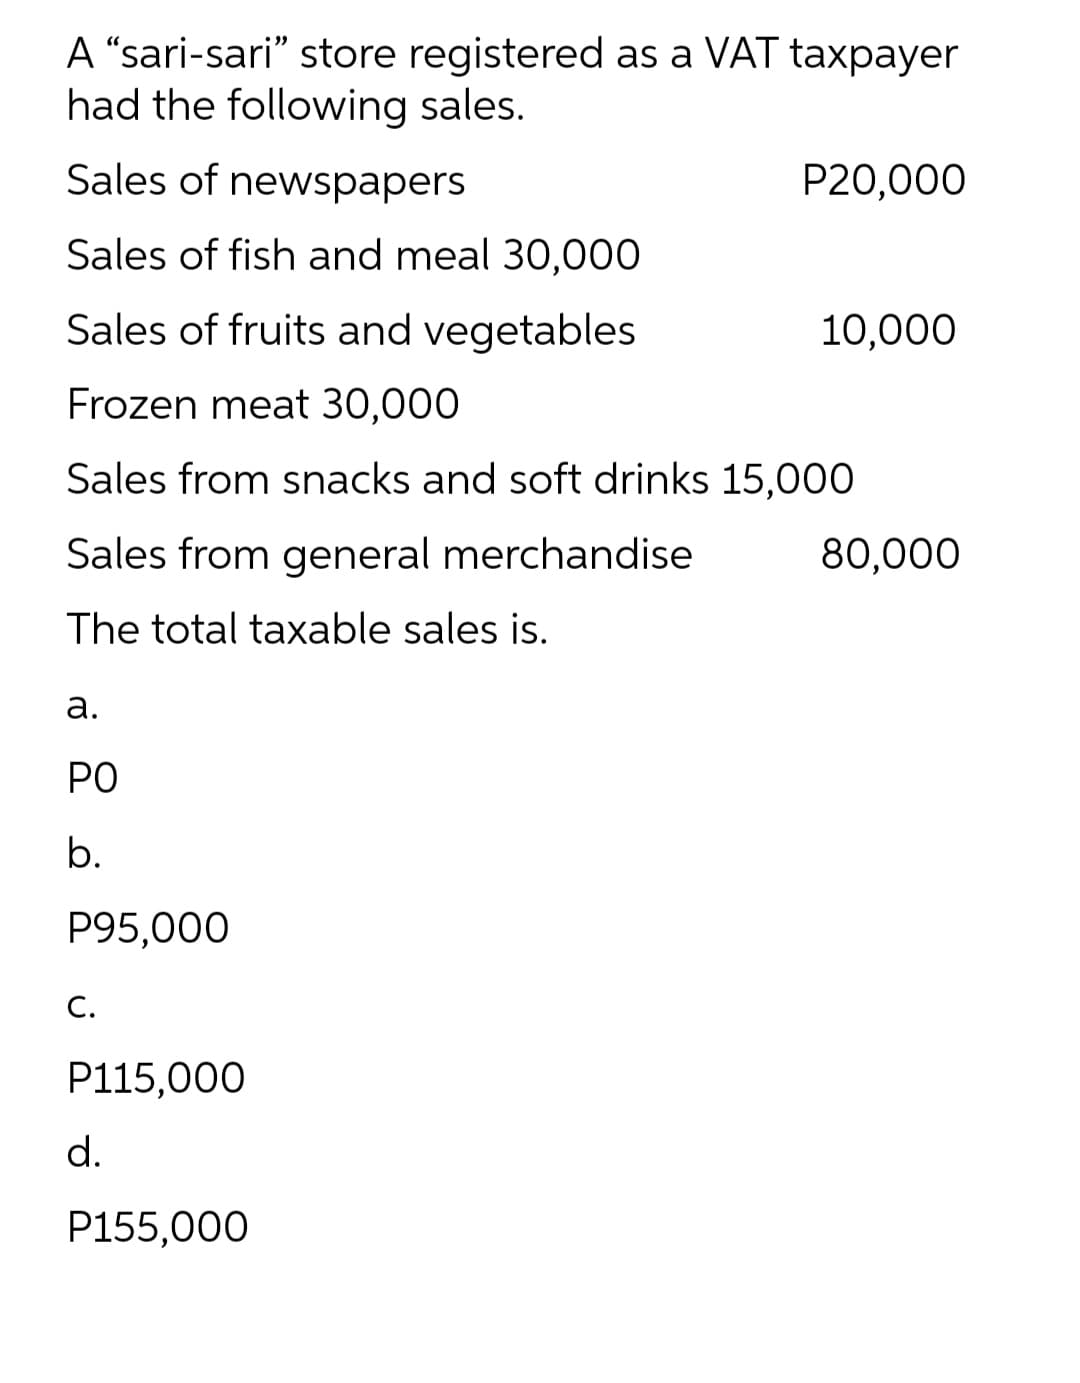 A “sari-sari" store registered as a VAT taxpayer
had the following sales.
Sales of newspapers
P20,000
Sales of fish and meal 30,00
Sales of fruits and vegetables
10,000
Frozen meat 30,000
Sales from snacks and soft drinks 15,000
Sales from general merchandise
80,000
The total taxable sales is.
а.
PO
b.
P95,000
С.
P115,000
d.
P155,000
